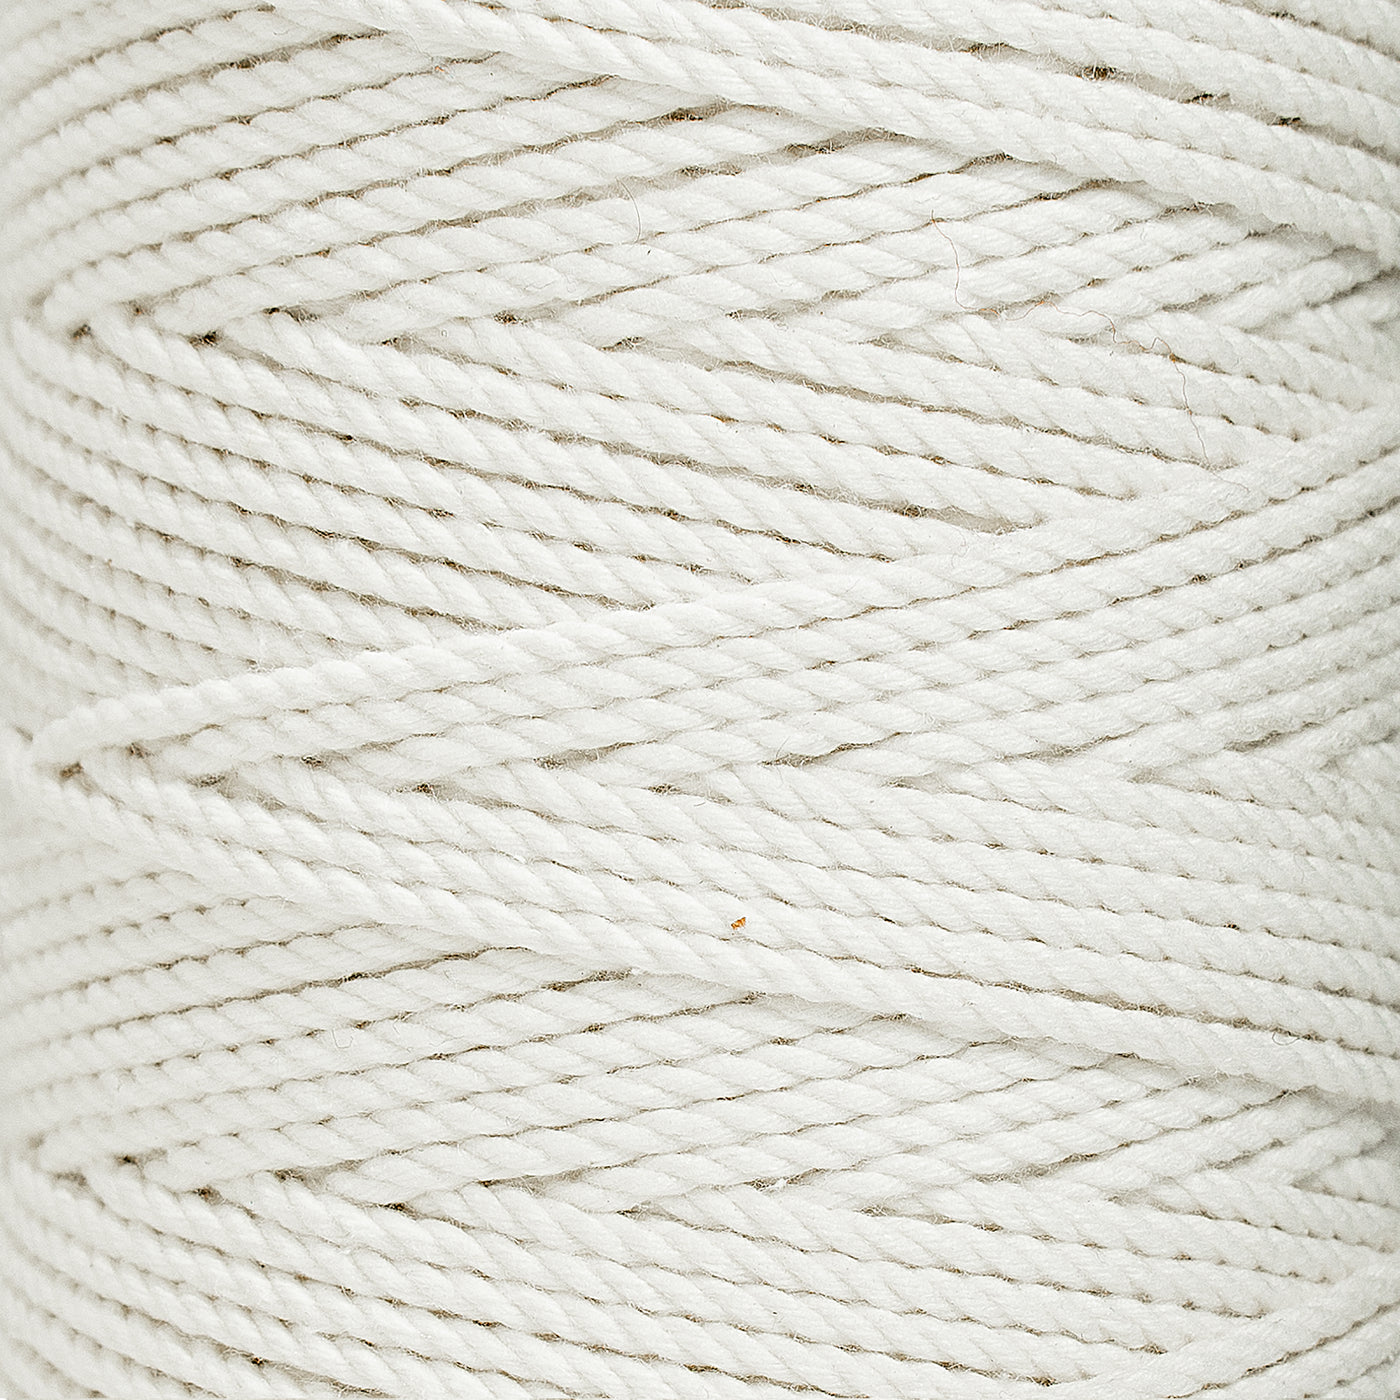 COTTON ROPE ZERO WASTE 2 MM - 3 PLY - IVORY COLOR